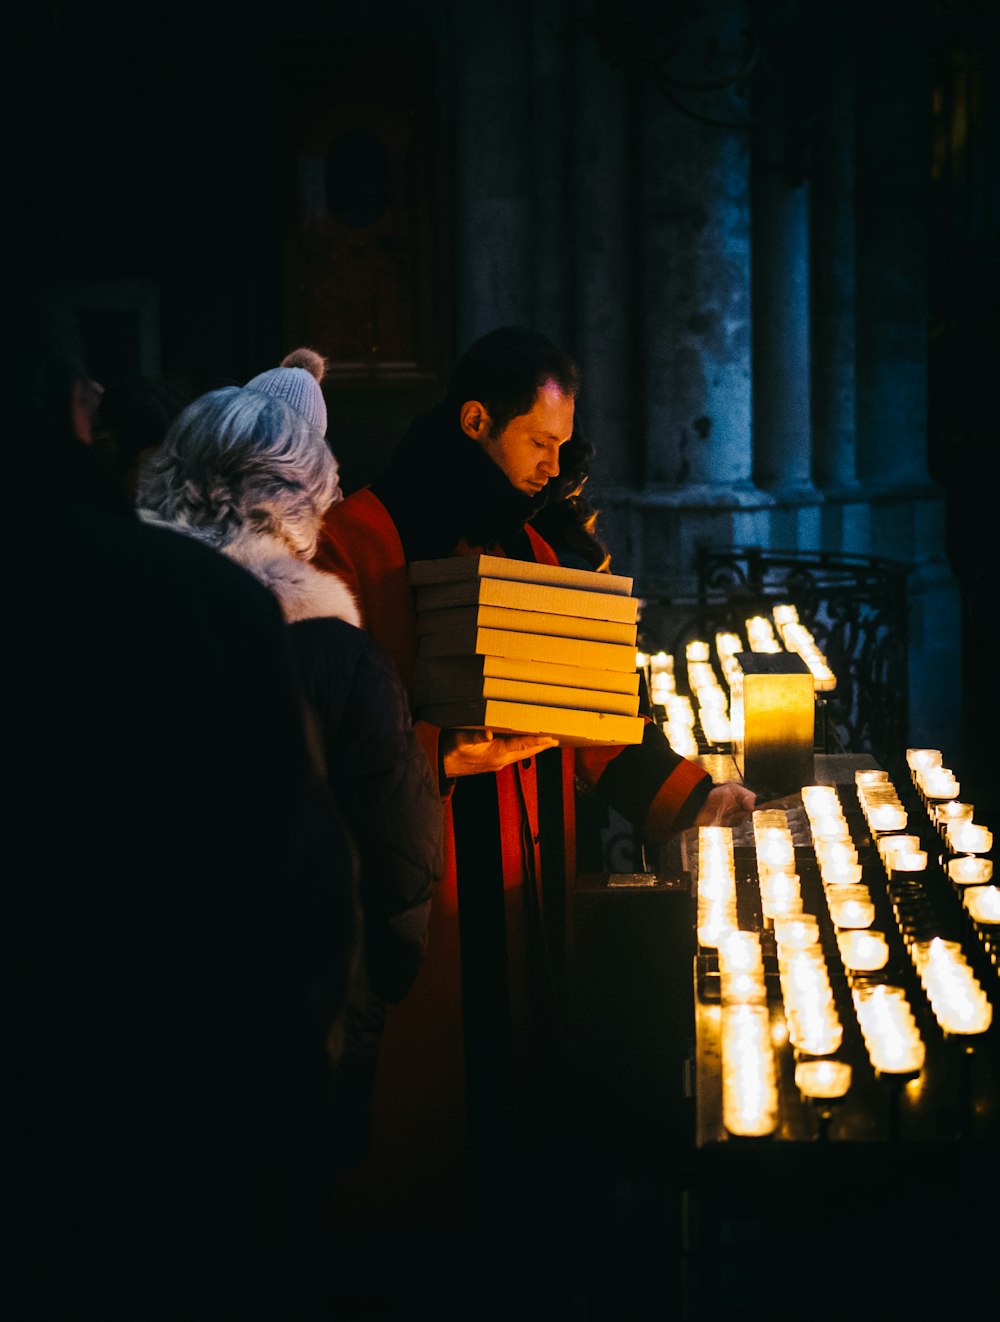 man in red coat holding white boxes holding candle